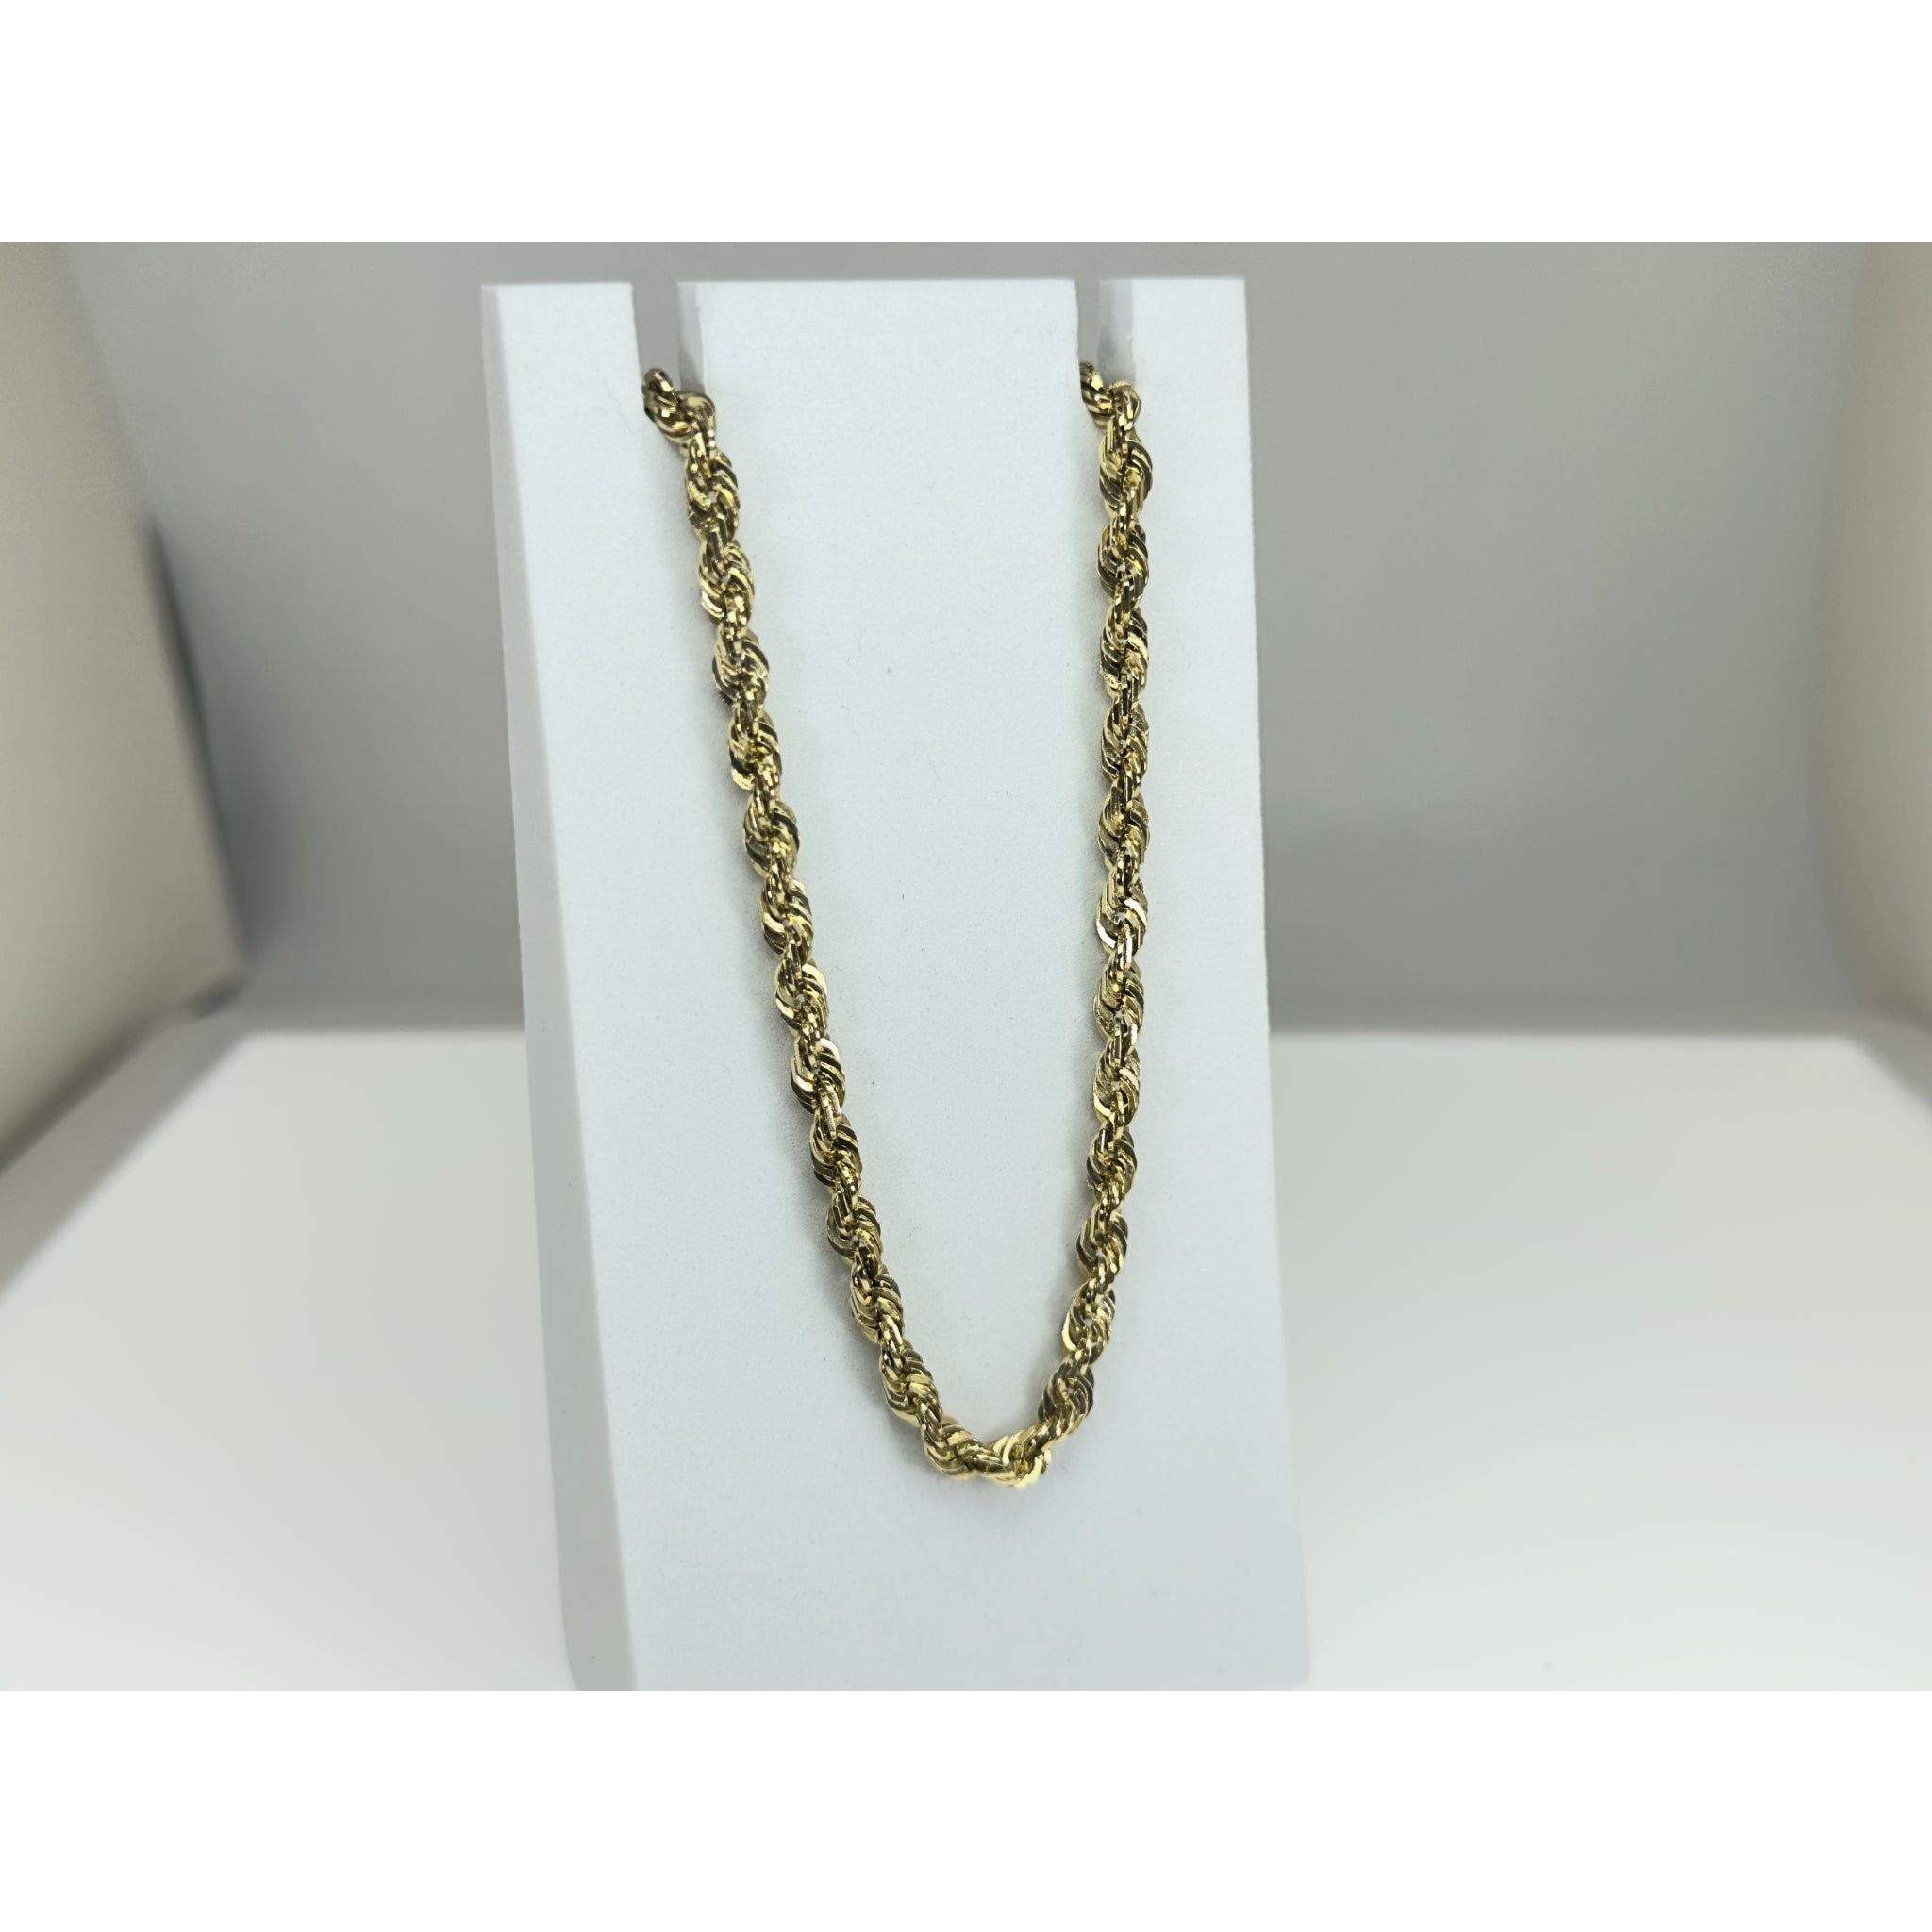 DR1734 - 14K Yellow Gold - Men's Gold Chains - Solid Rope